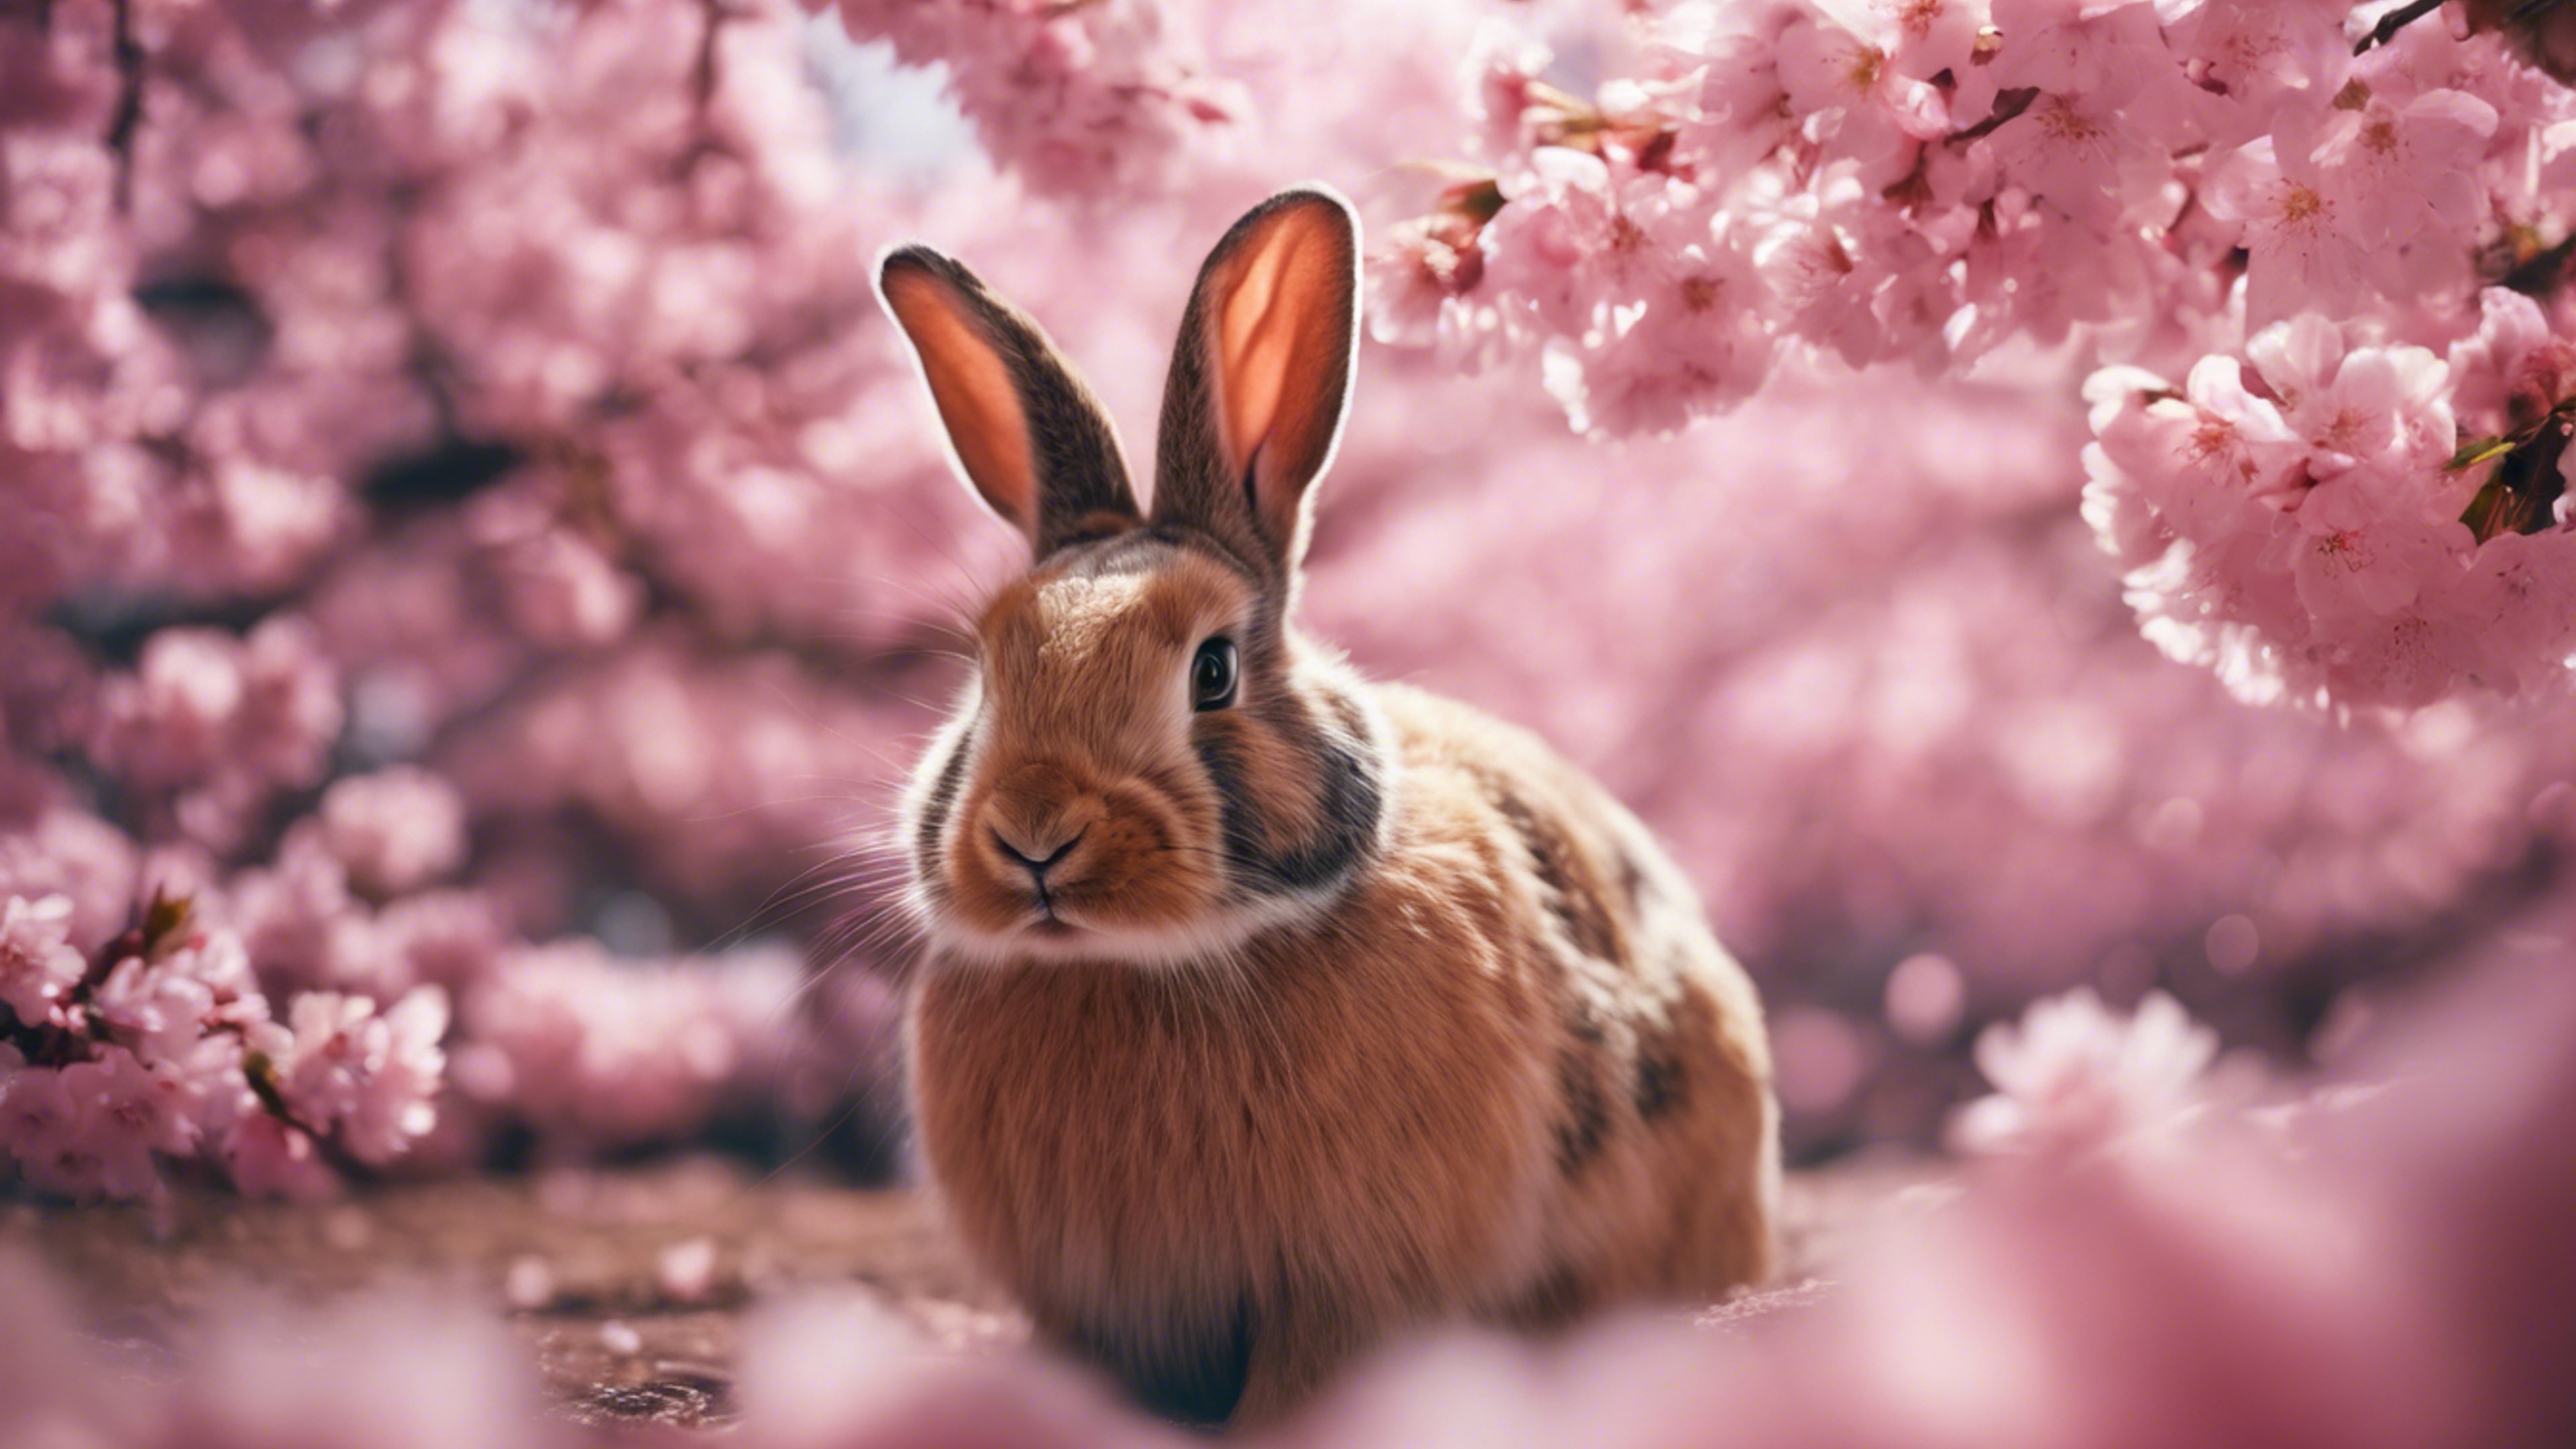 A rabbit amid a cherry blossom festival, surrounded by vibrant pink petals. 墙纸[82443ce6430044309a8d]